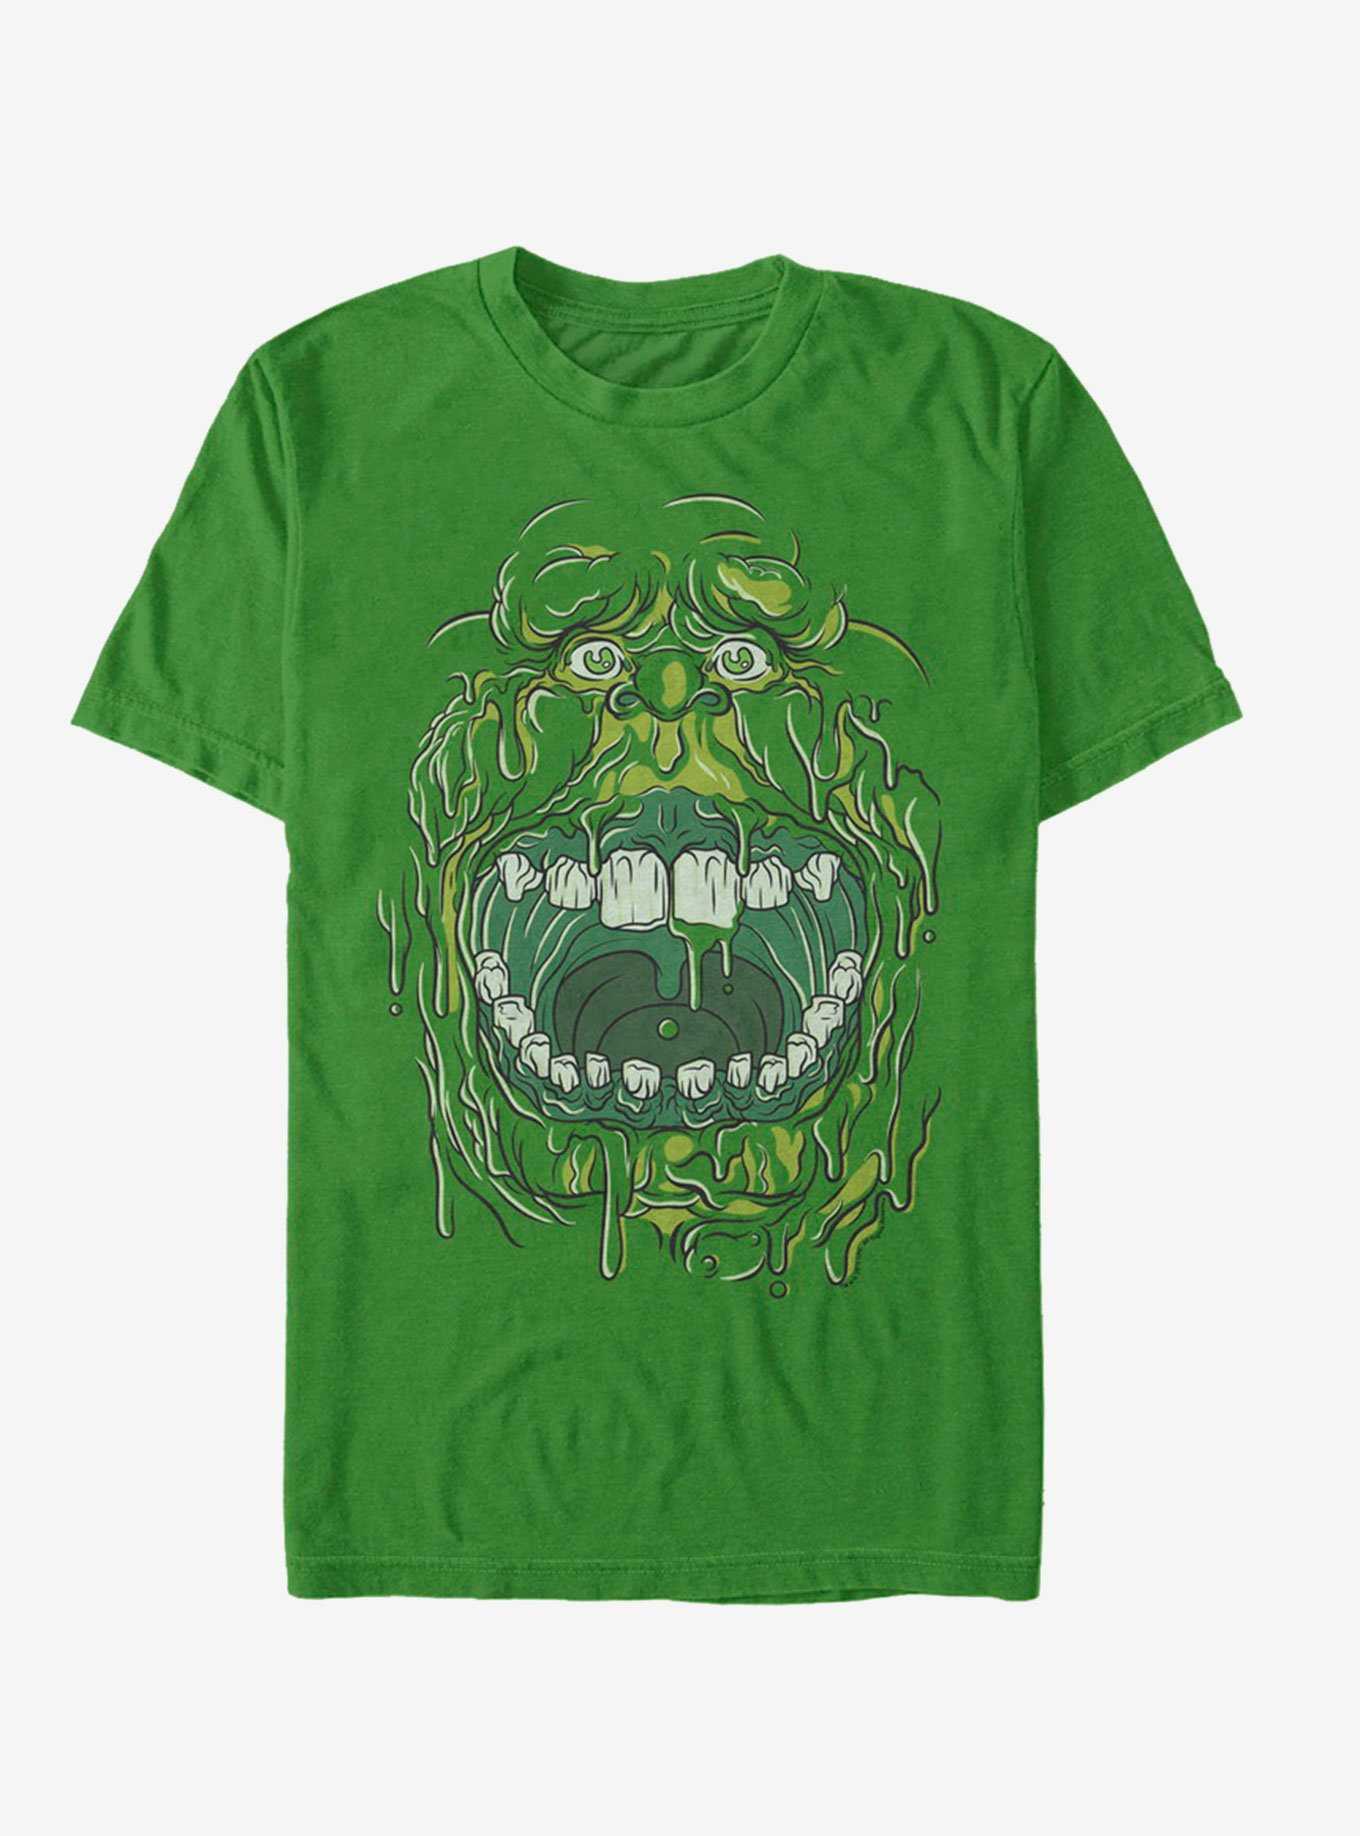 Ghostbusters Slimer Face Costume T-Shirt, , hi-res